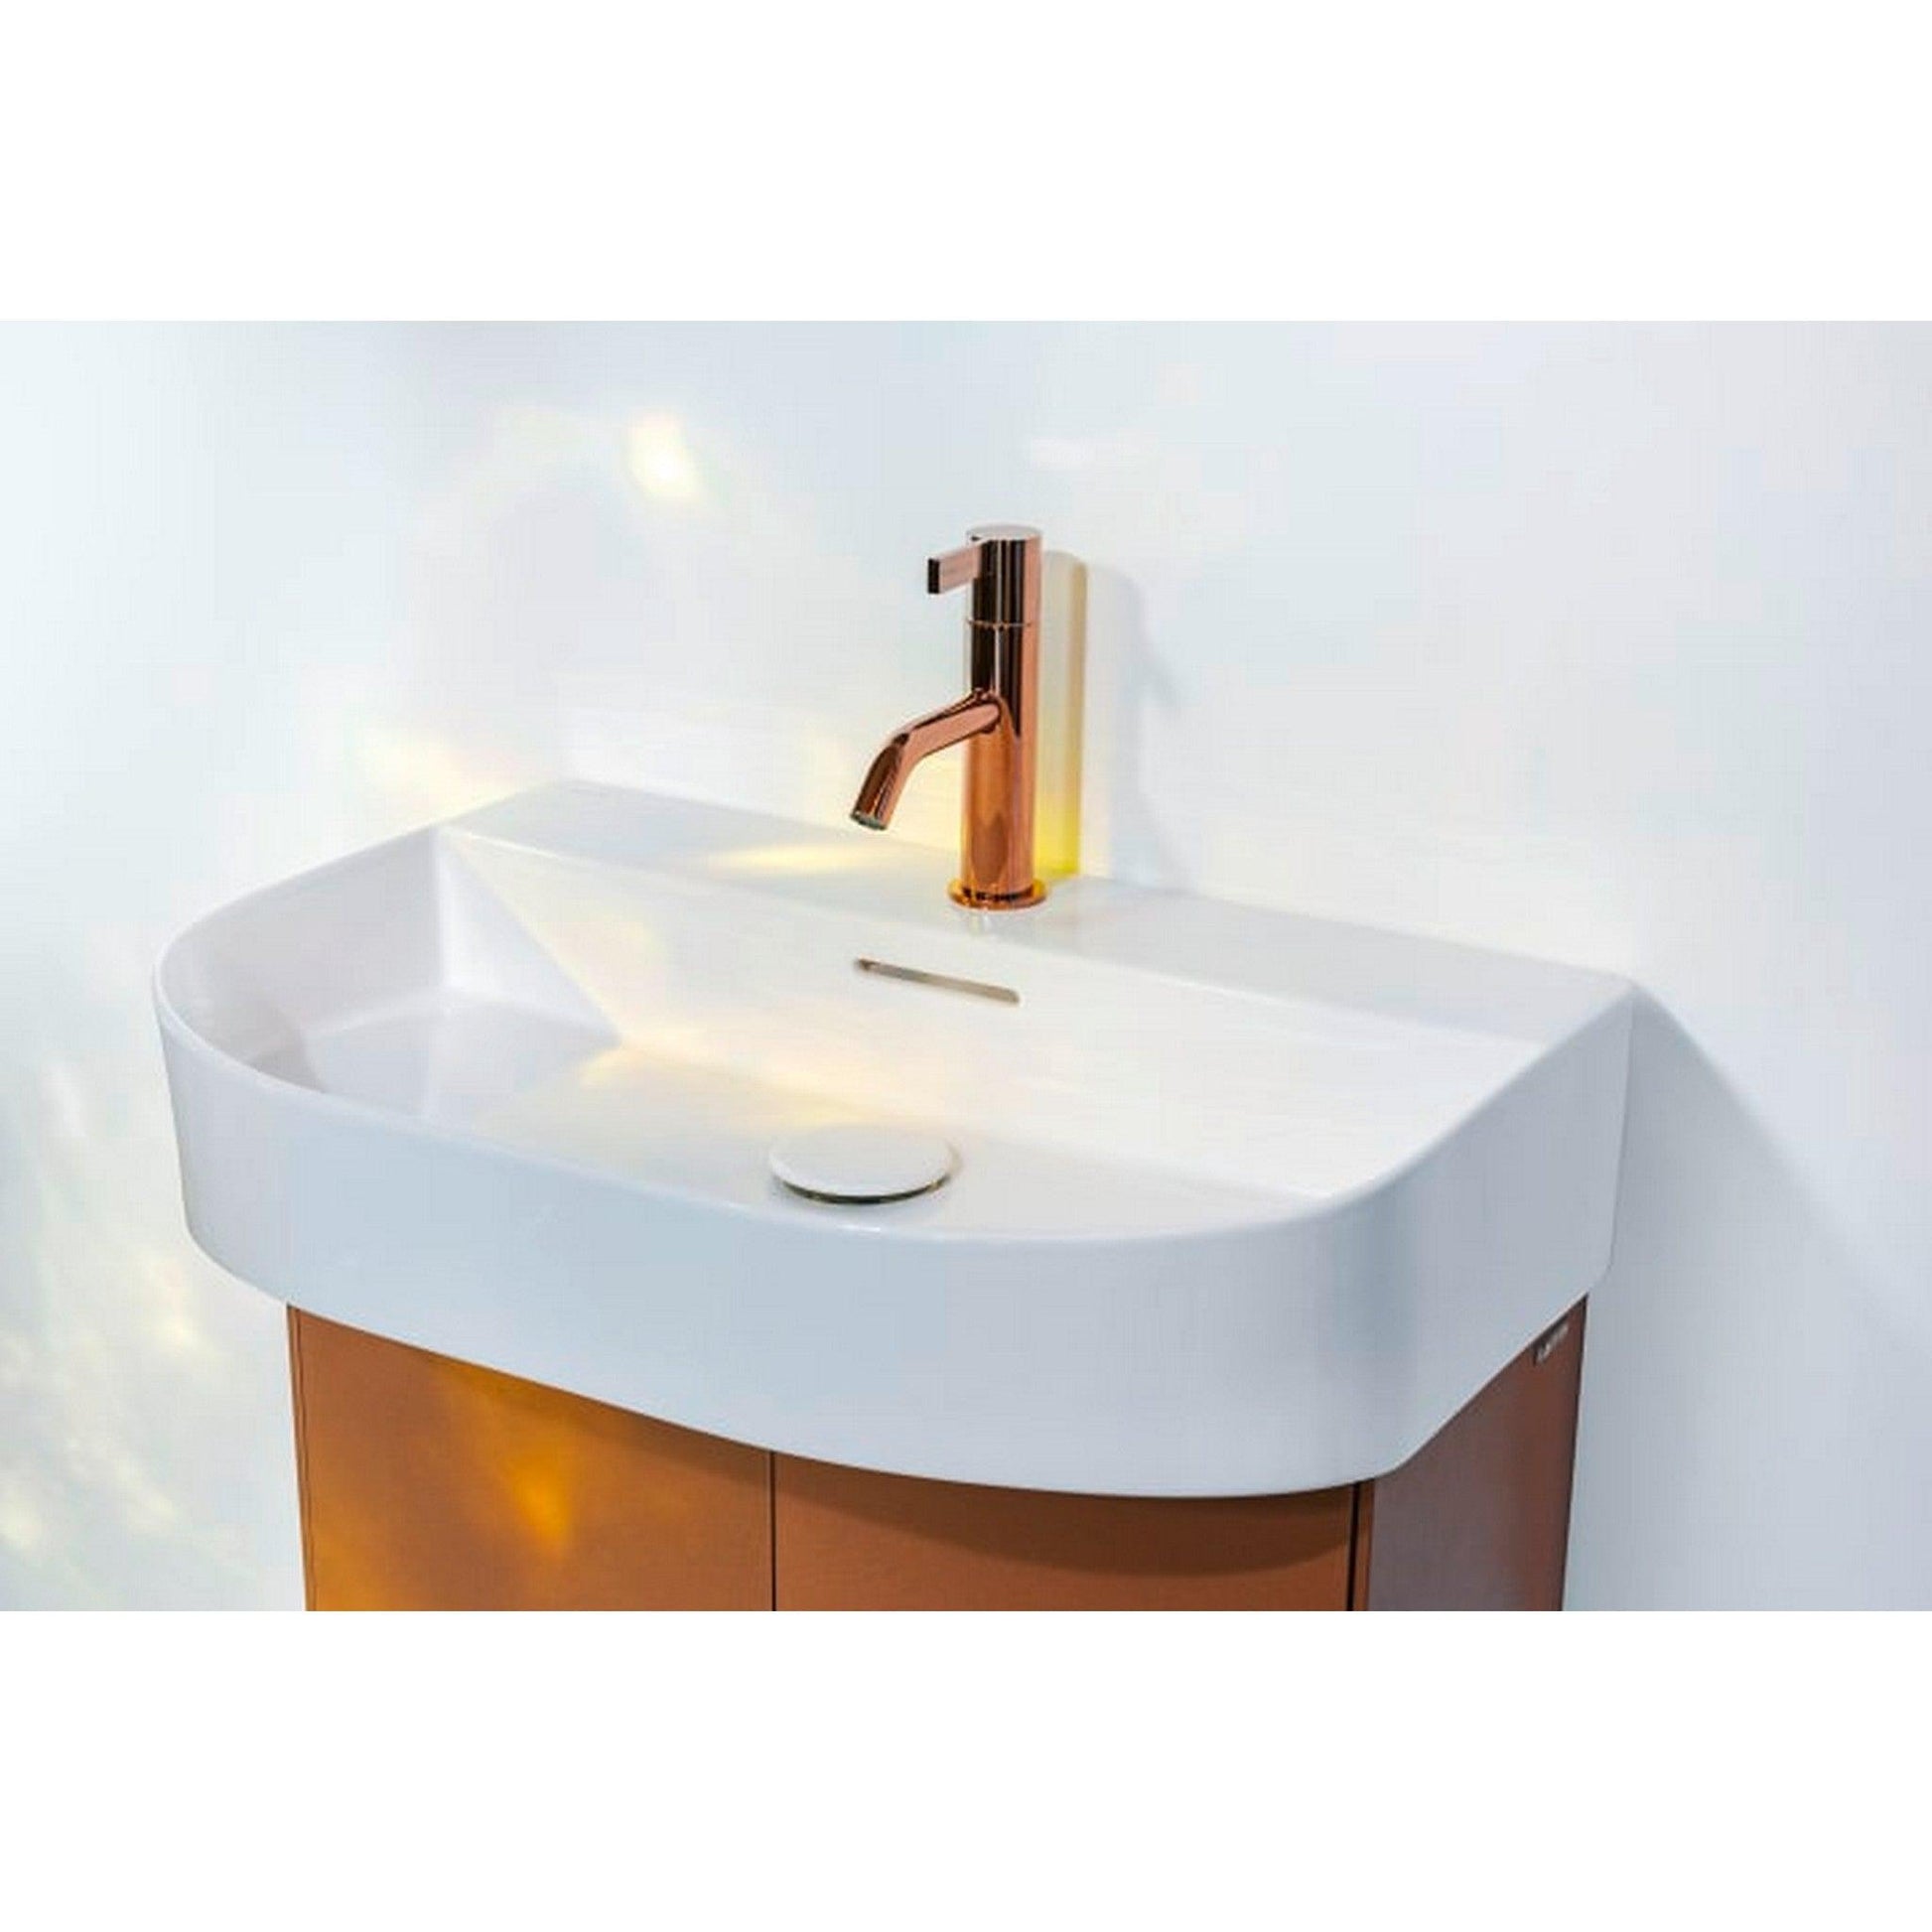 Laufen Sonar 24" White Ceramic Countertop Bathroom Sink Without Faucet Hole